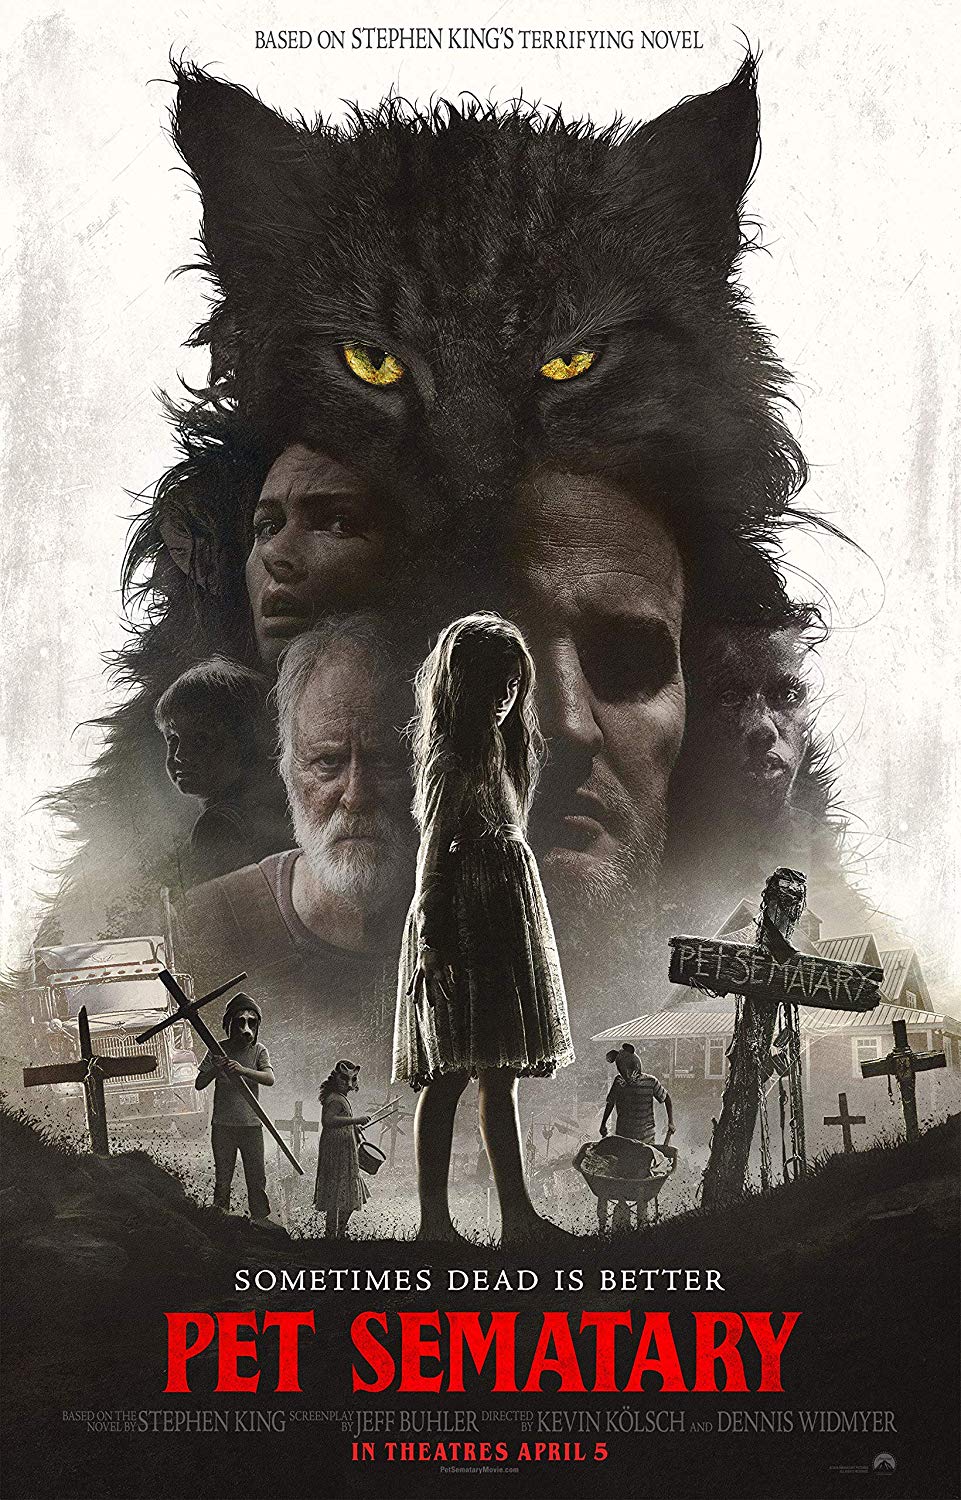 Pet Sematary (1989) and Pet Sematary (2019) Reviews and Comparison